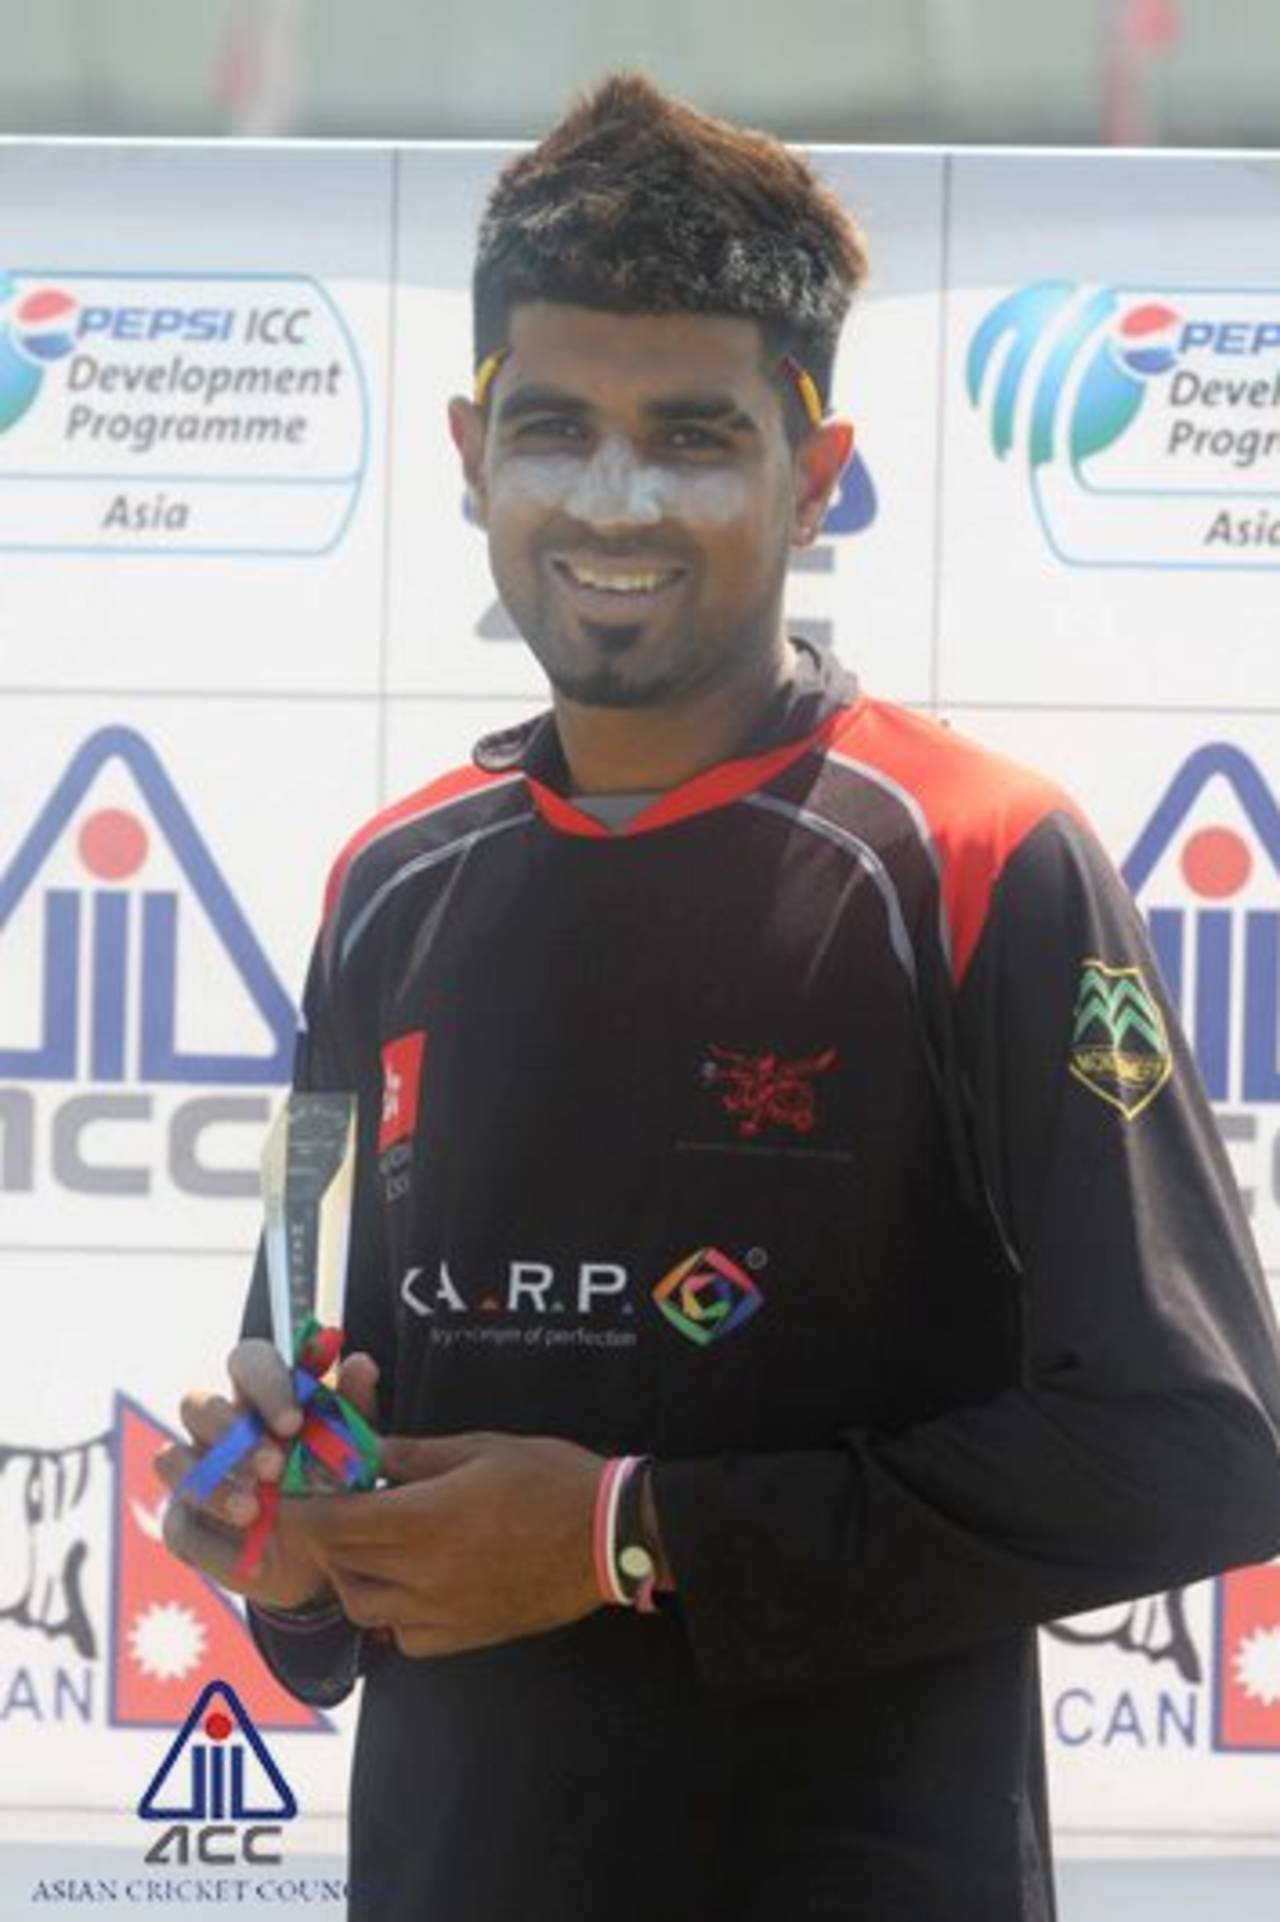 Waqas Barkat earned the Man of the Match for his fine century against Maldives